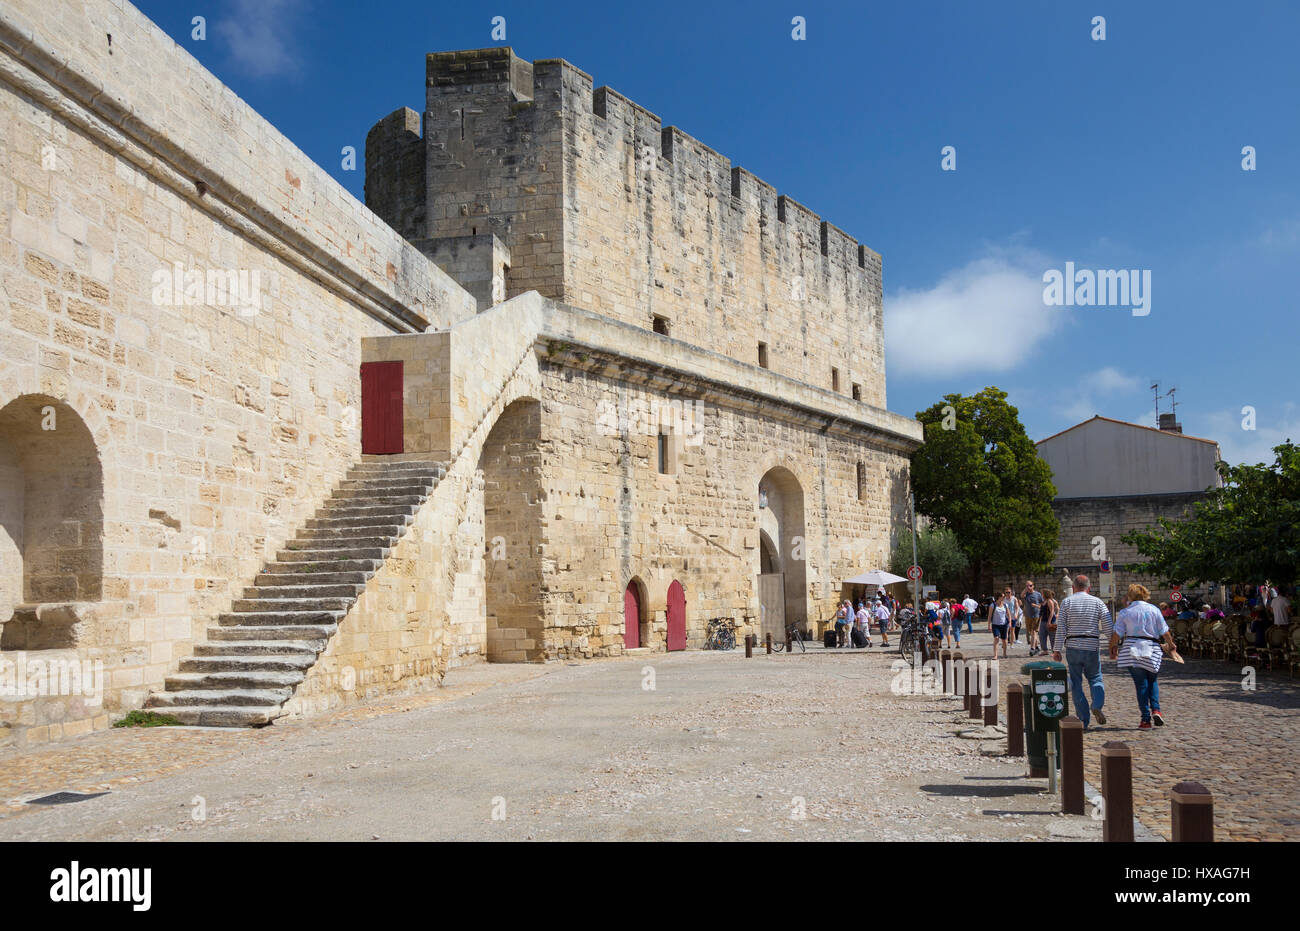 The well preserved medieval town walls of Aigues-Mortes, Gard, France Stock Photo